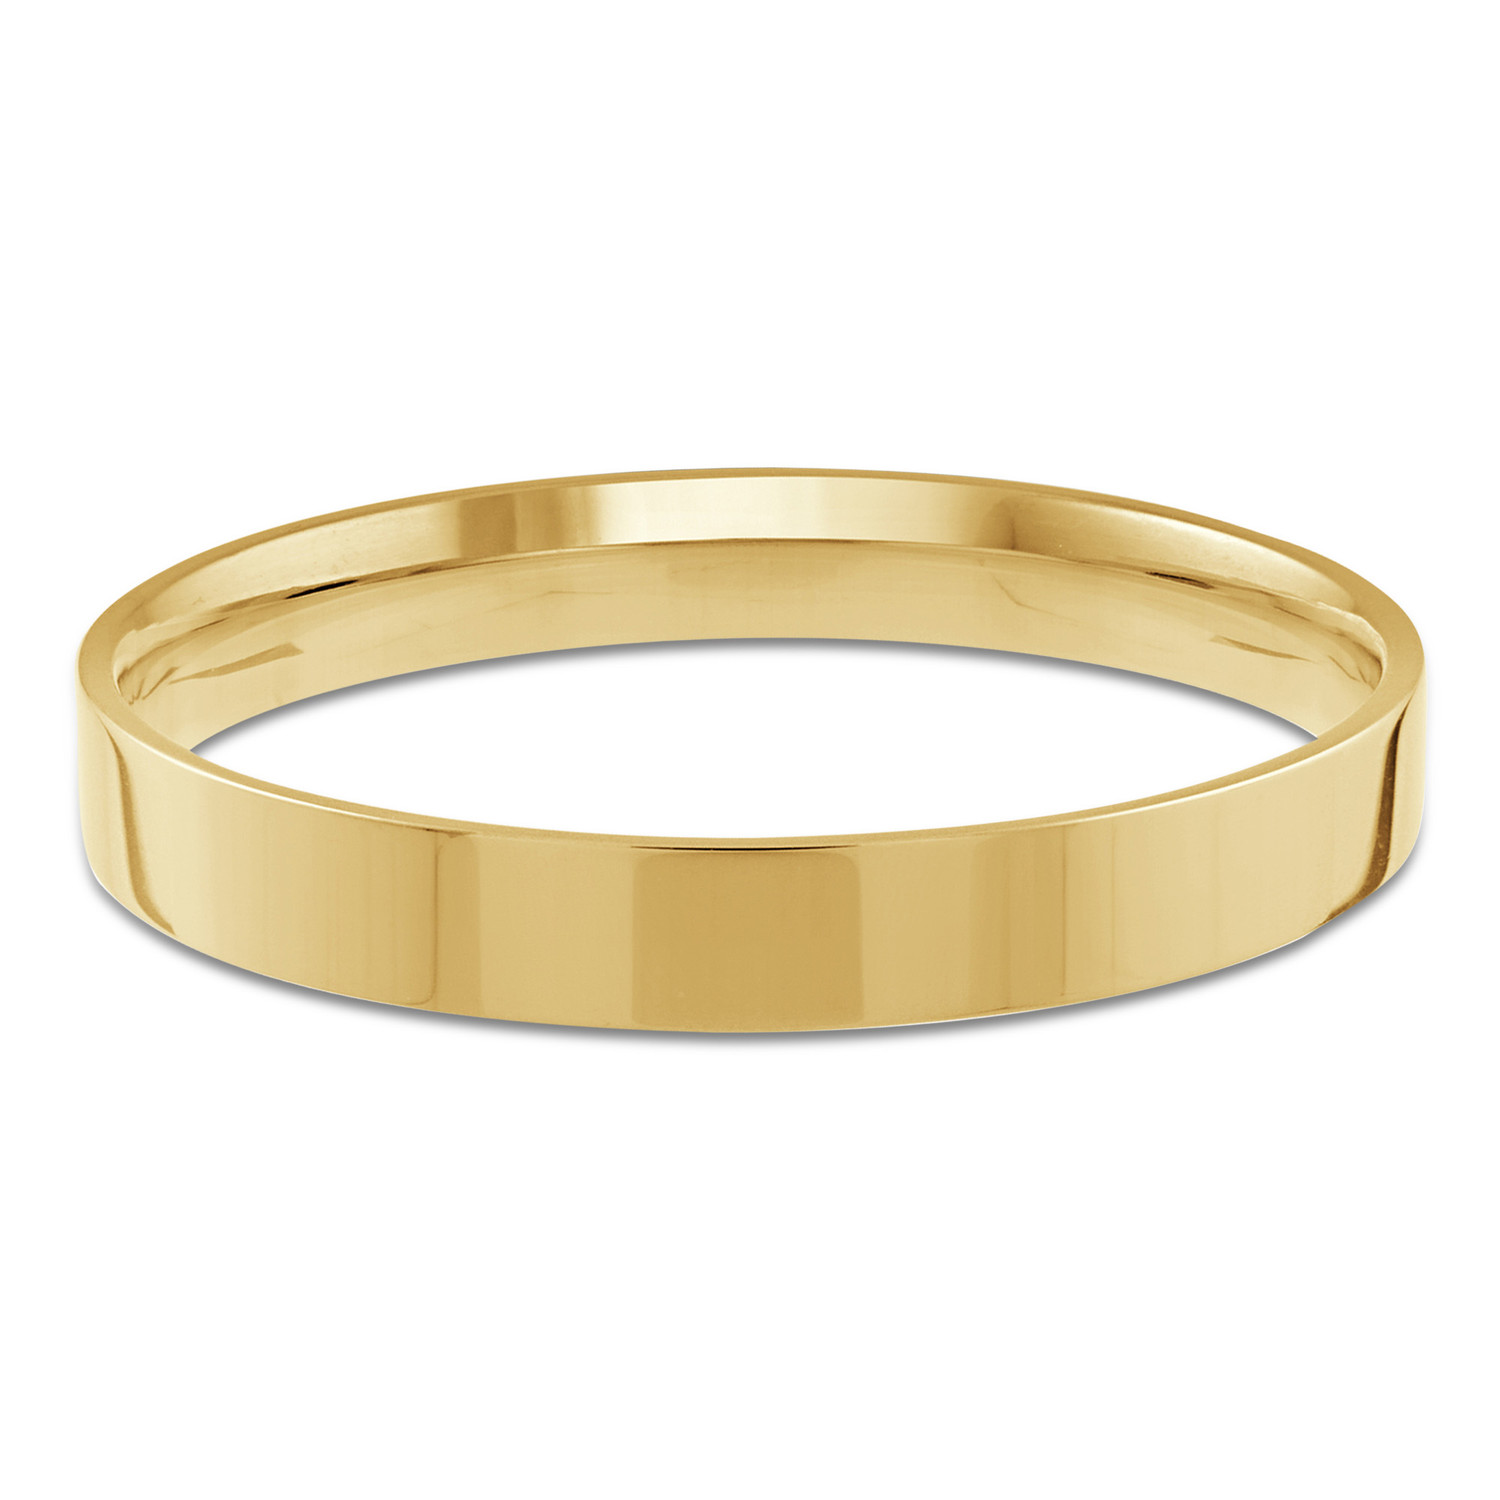 2 MM Classic Womens Wedding Band in Yellow Gold (MDVBC0003-2MM-Y)